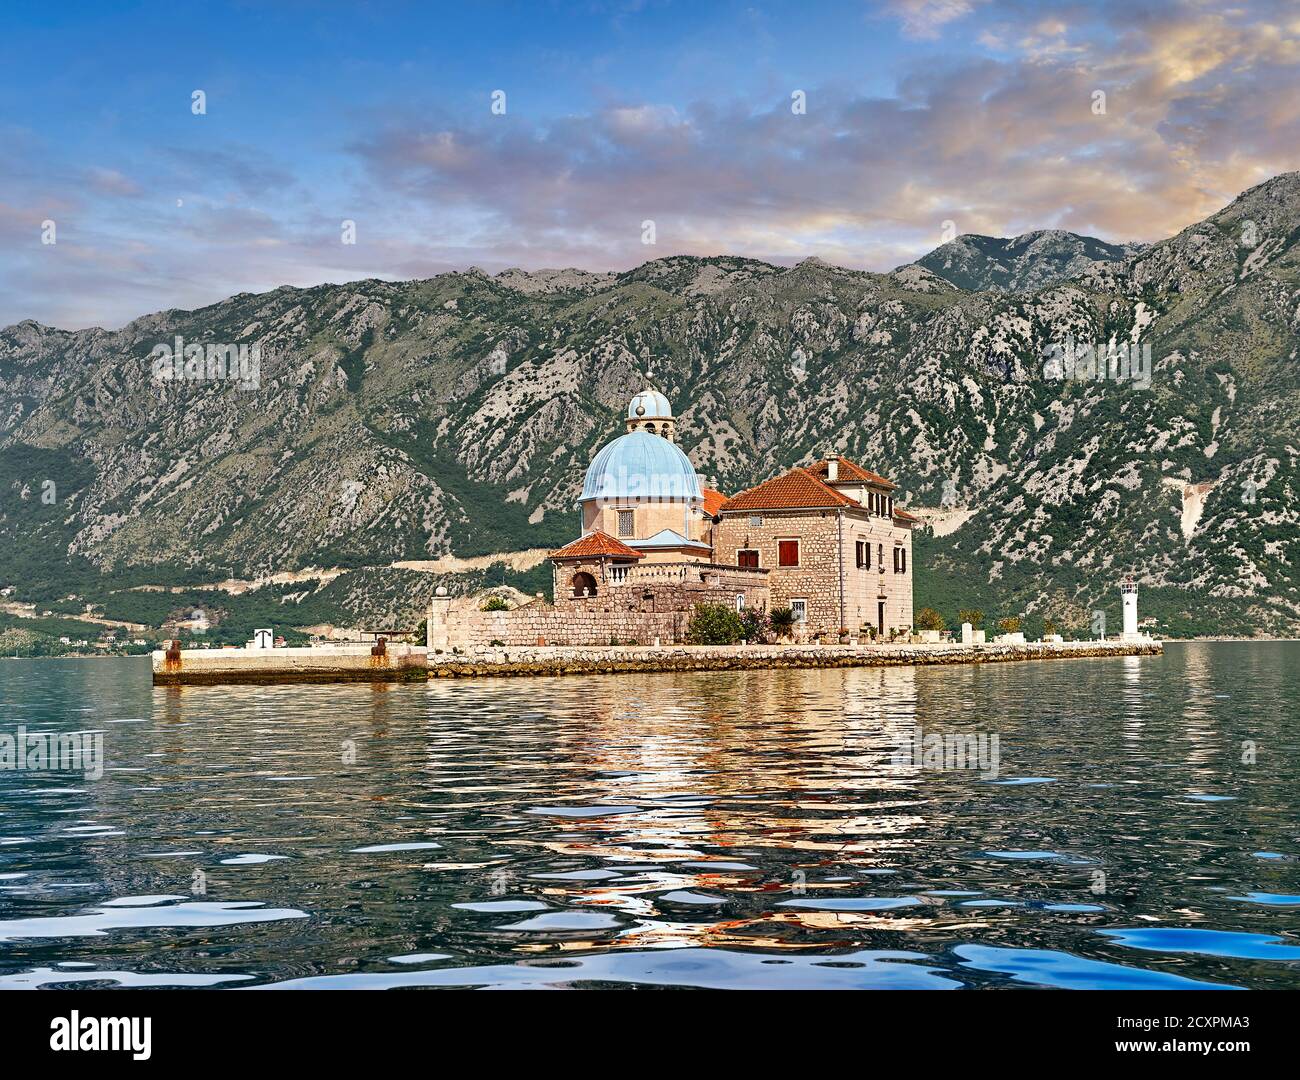 scenic view of the Our Lady of the Rocks Island Church (Gospa od Skrpjela), Kotor Bay, Montenegro Stock Photo